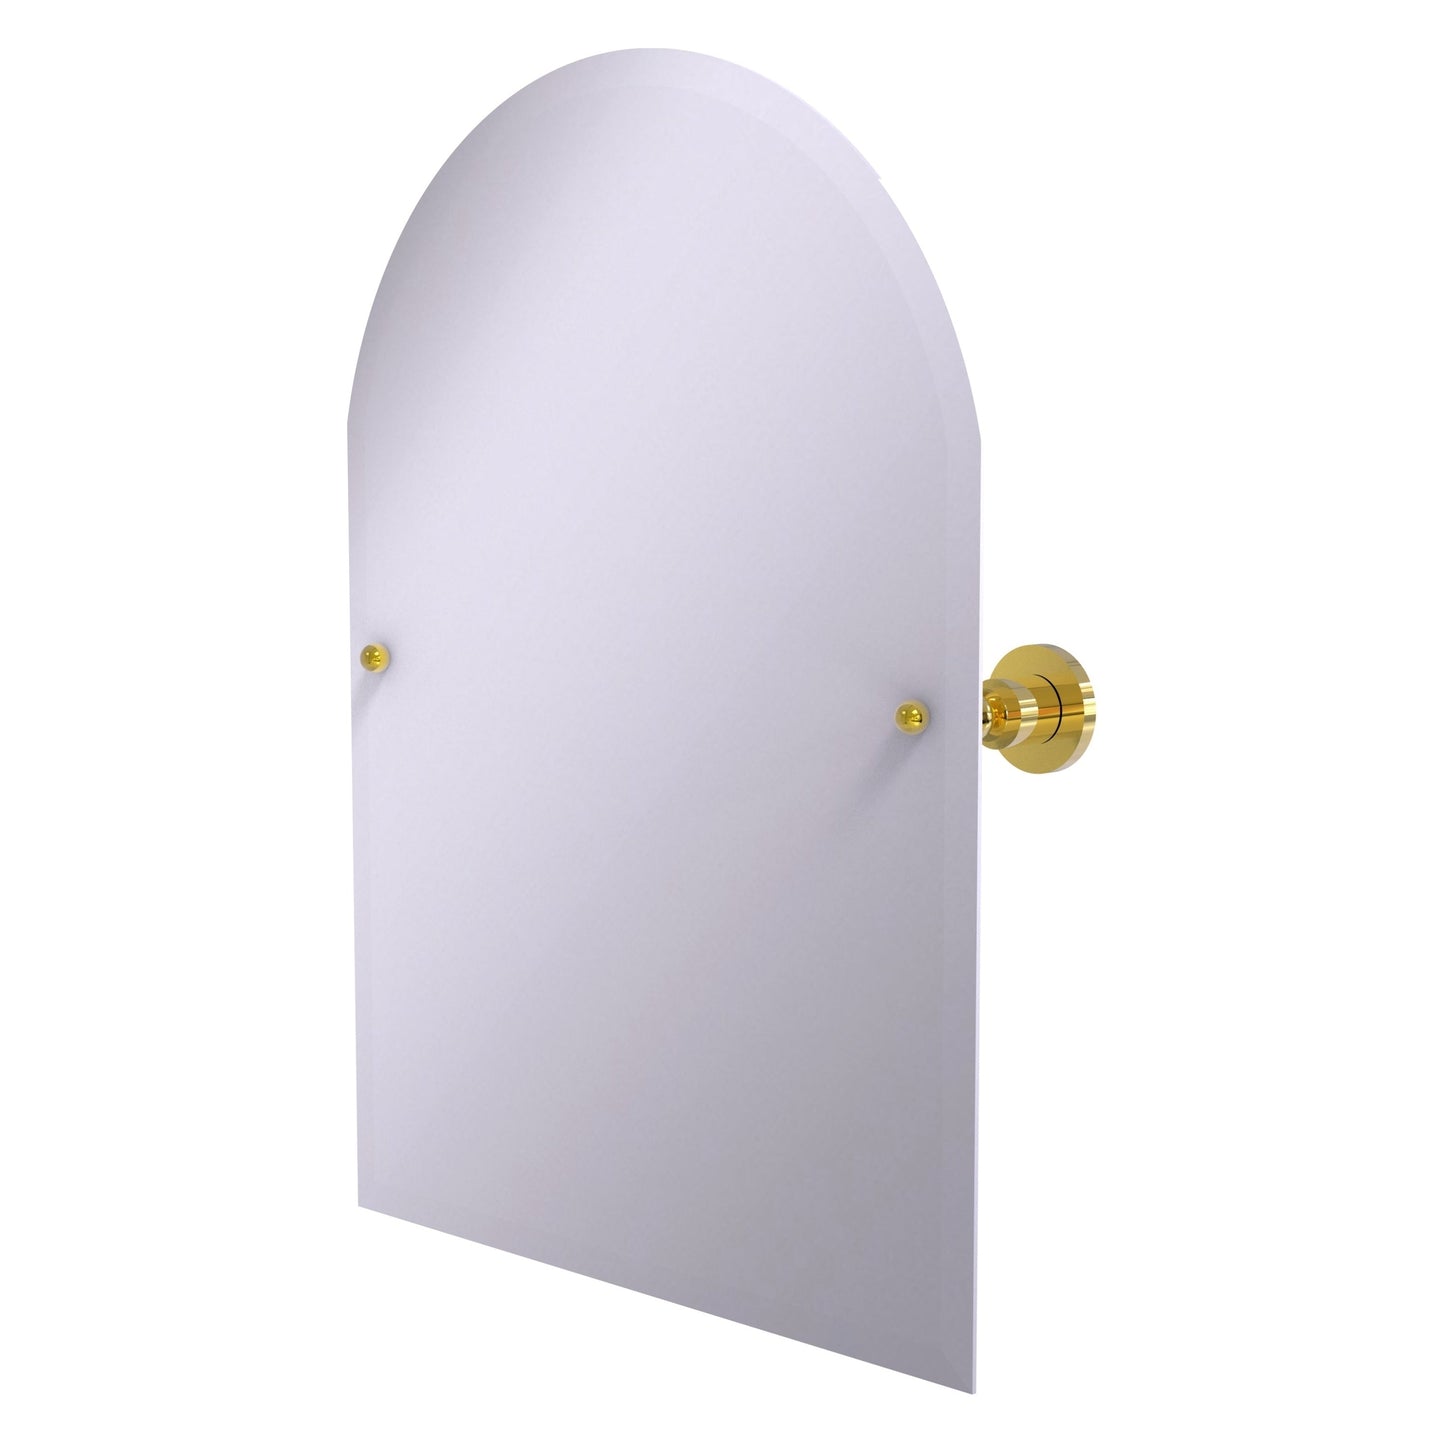 Allied Brass Astor Place 29" x 21" Polished Brass Solid Brass Frameless Arched Top Tilt Mirror With Beveled Edge